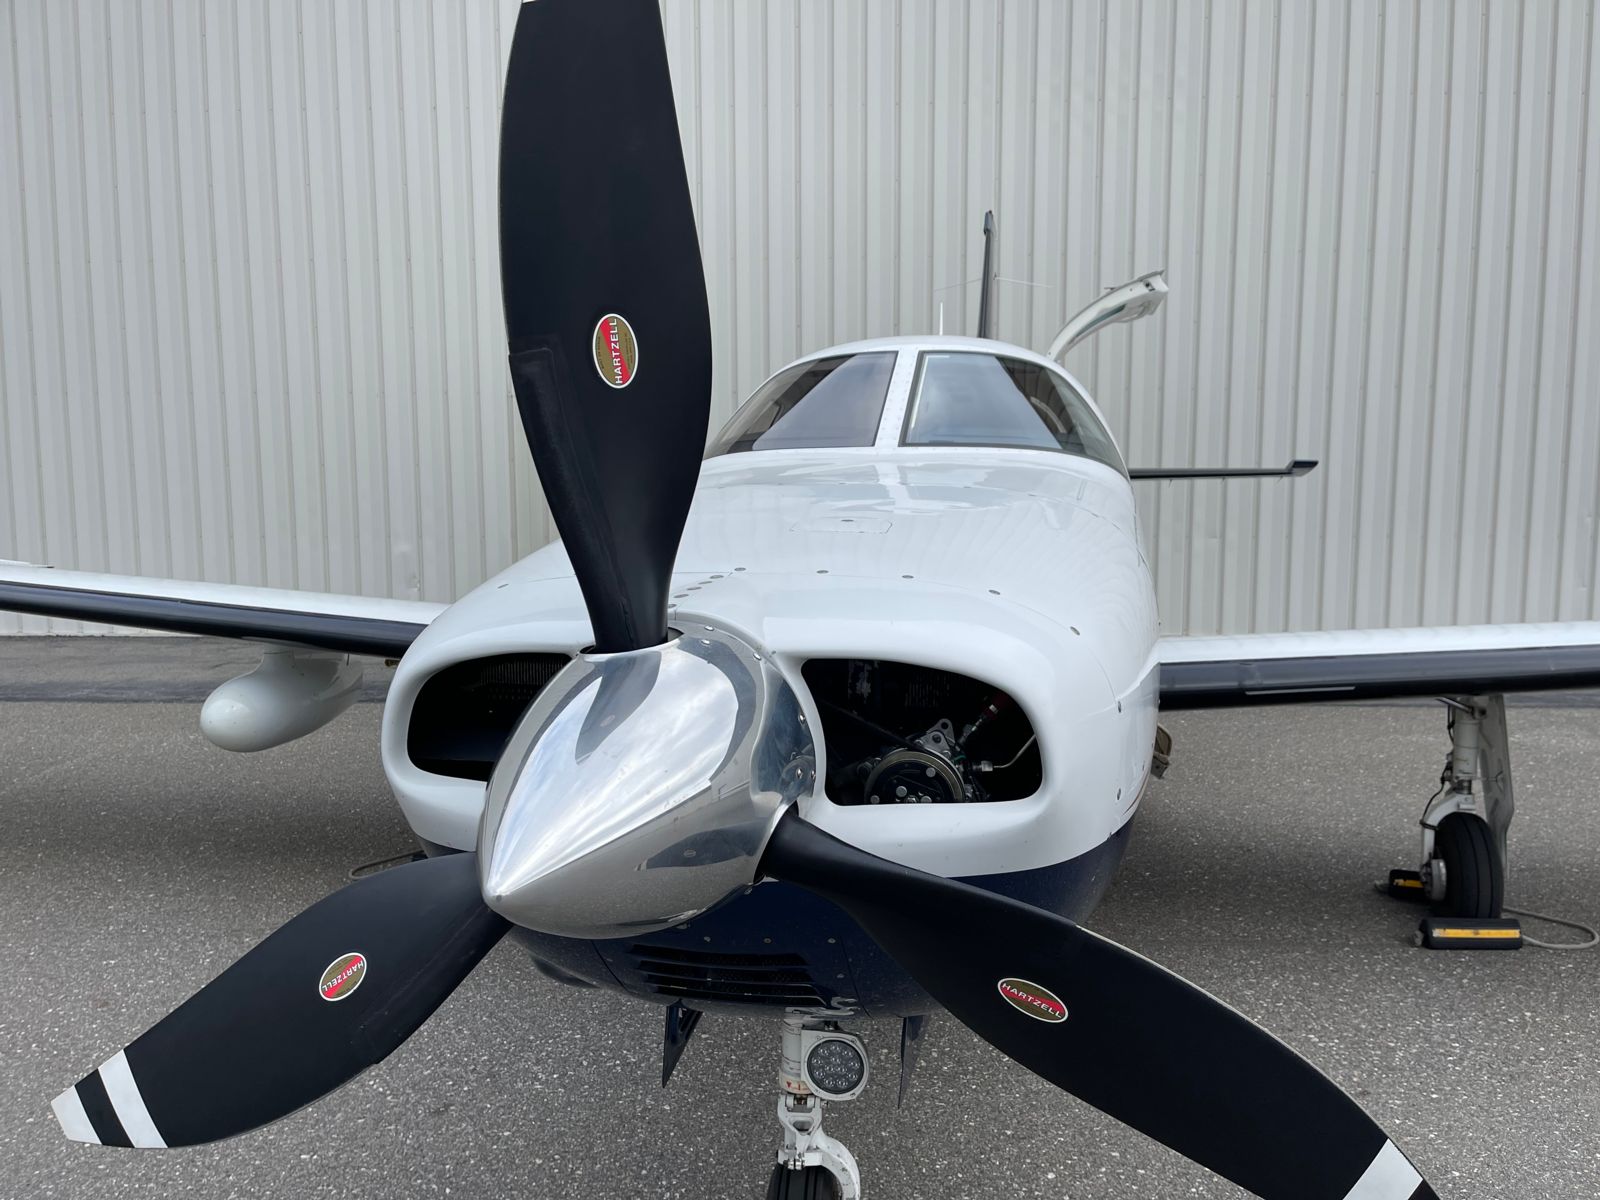 Piper Matrix  S/N 4692180 for sale | gallery image: /userfiles/images/Piper_Matrix_sn180/6a777826-3faf-412a-8666-44f257bc65ab.jpeg